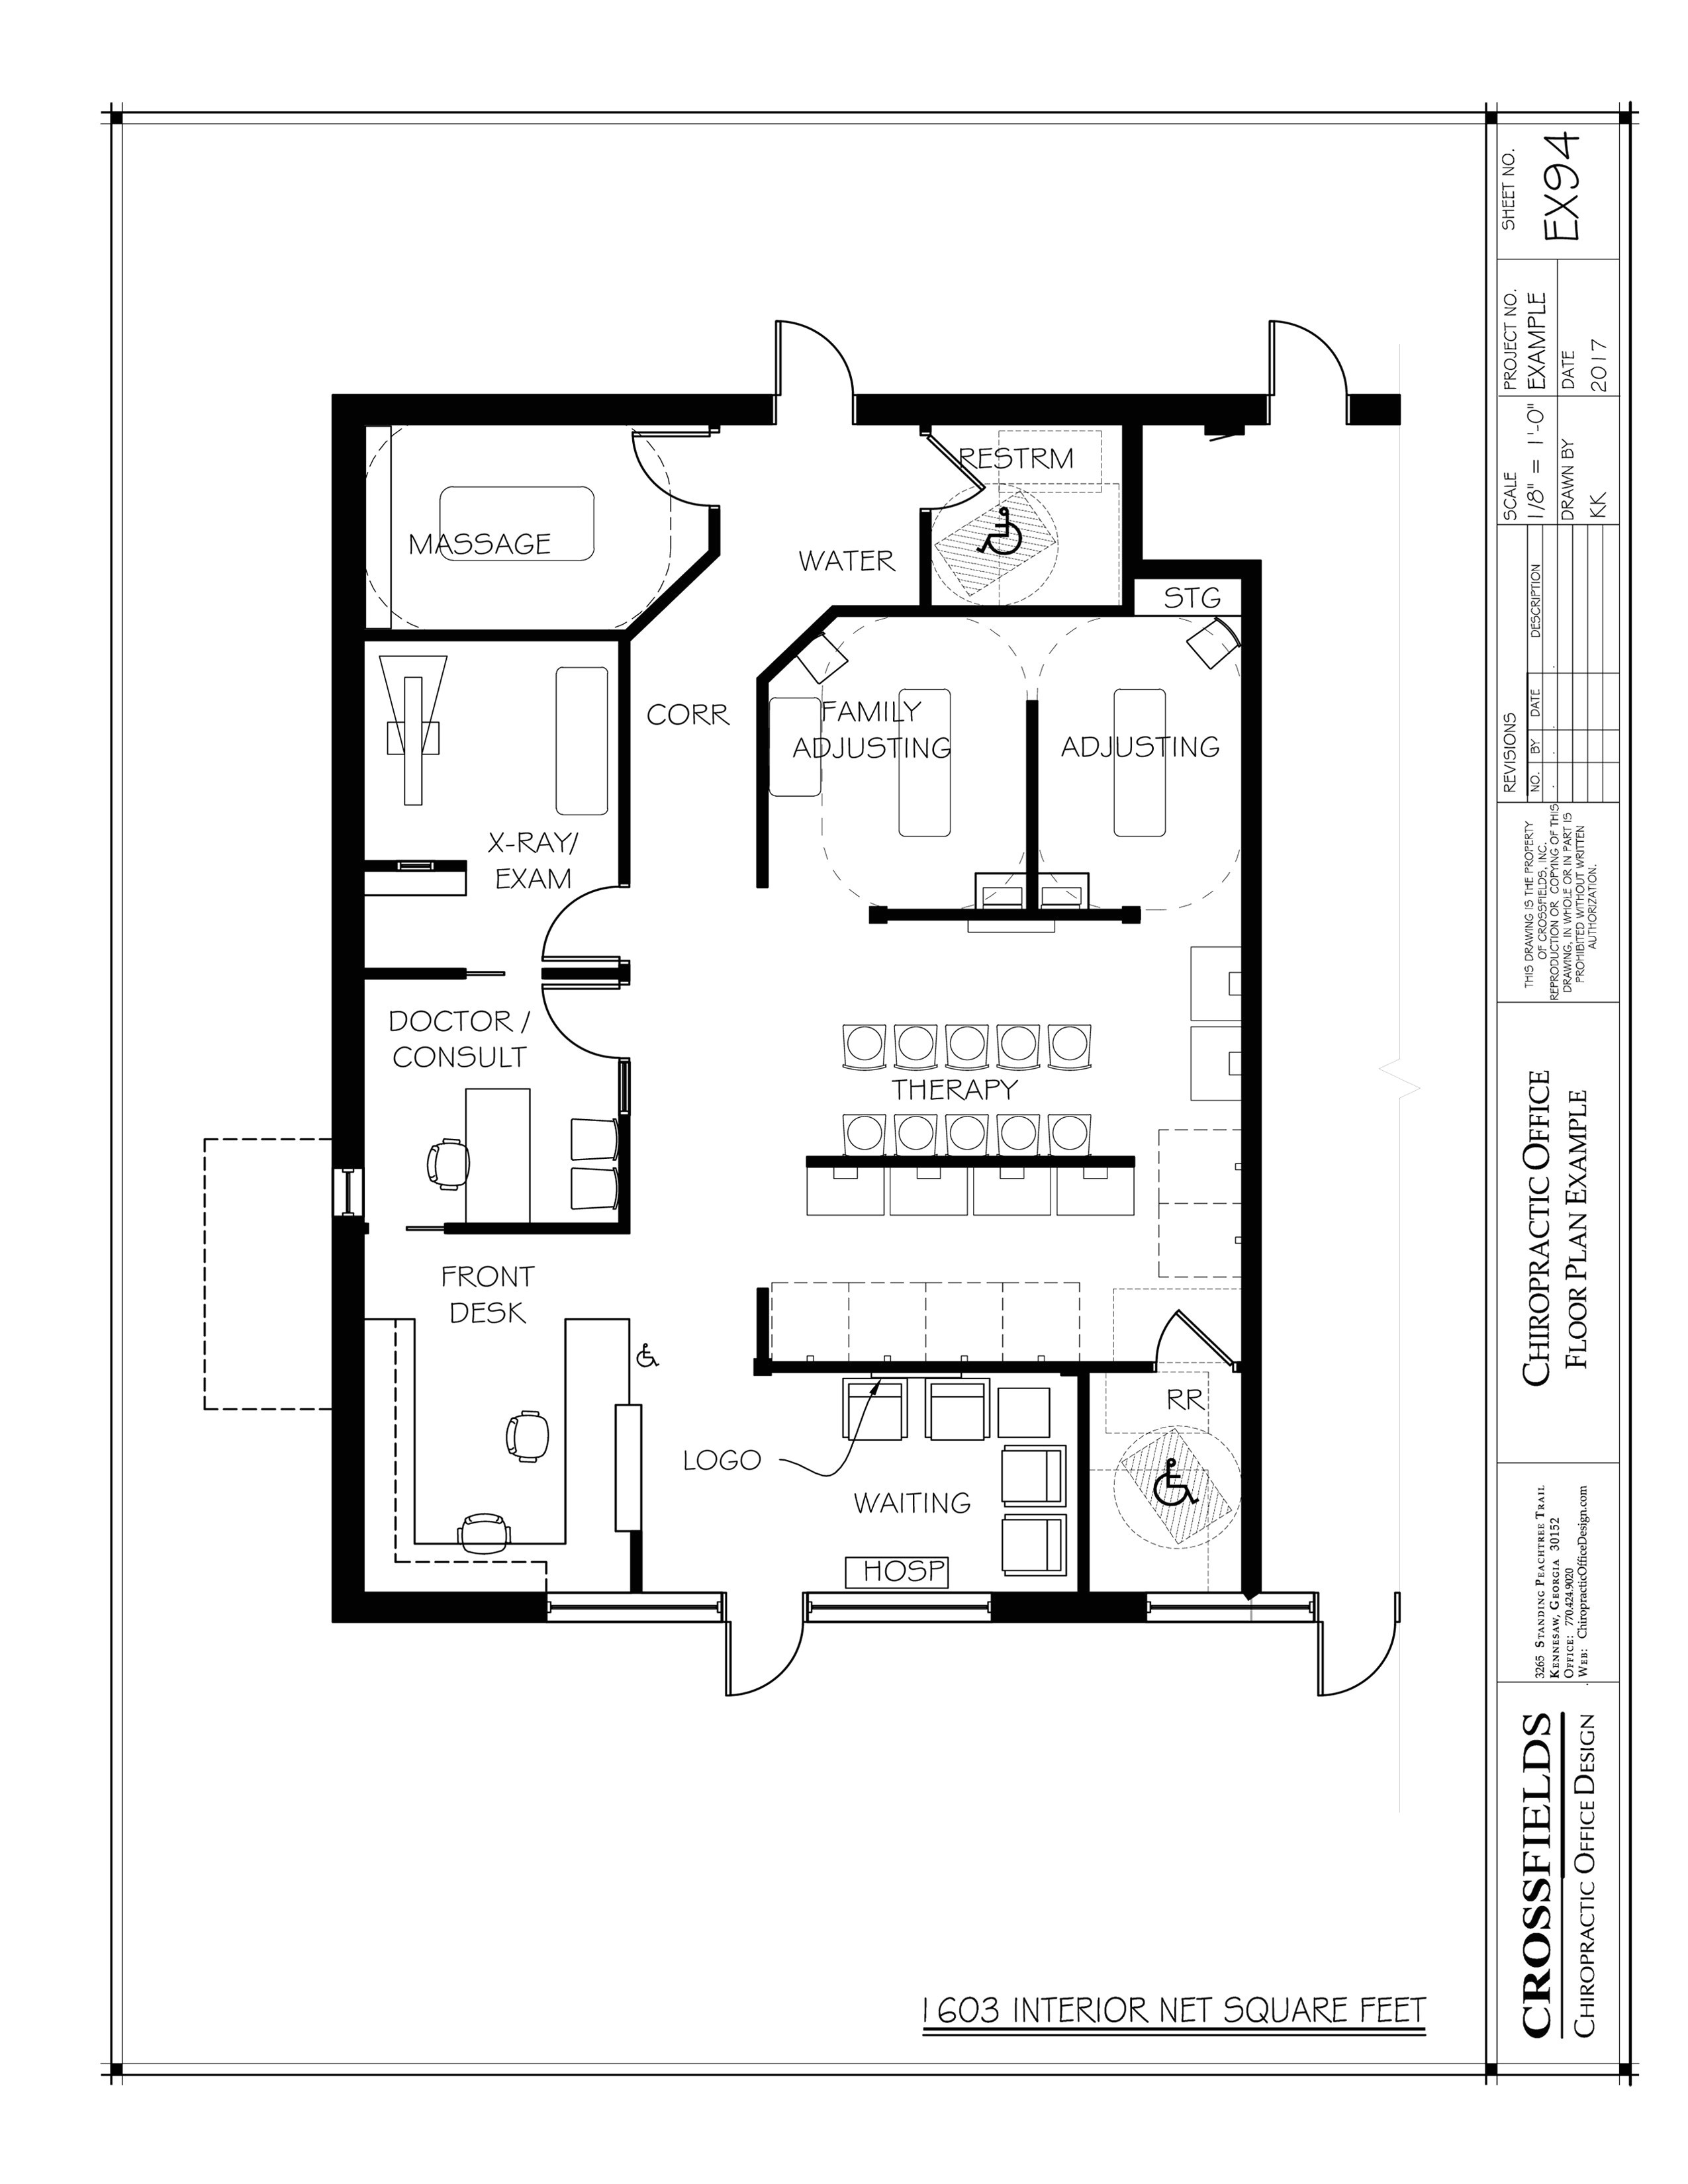 House Plans by Lot Size Floor Plan Size Lovely House Plans by Lot Size Beautiful